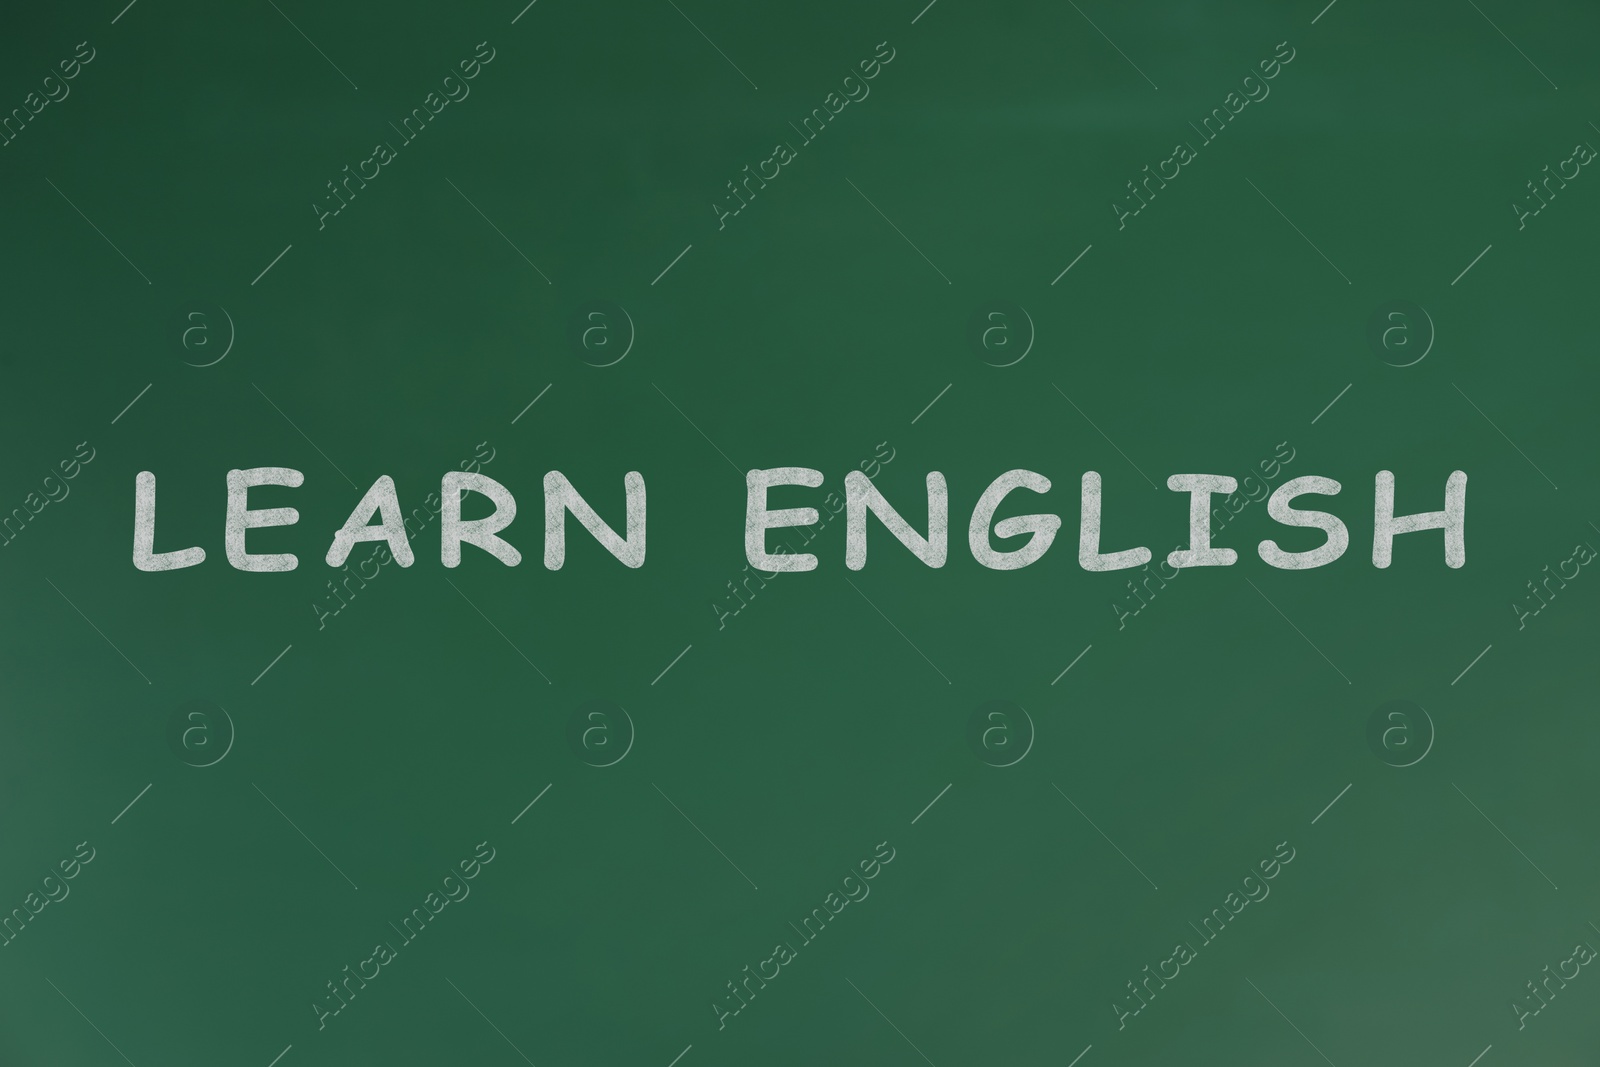 Image of Green chalkboard with text Learn English 